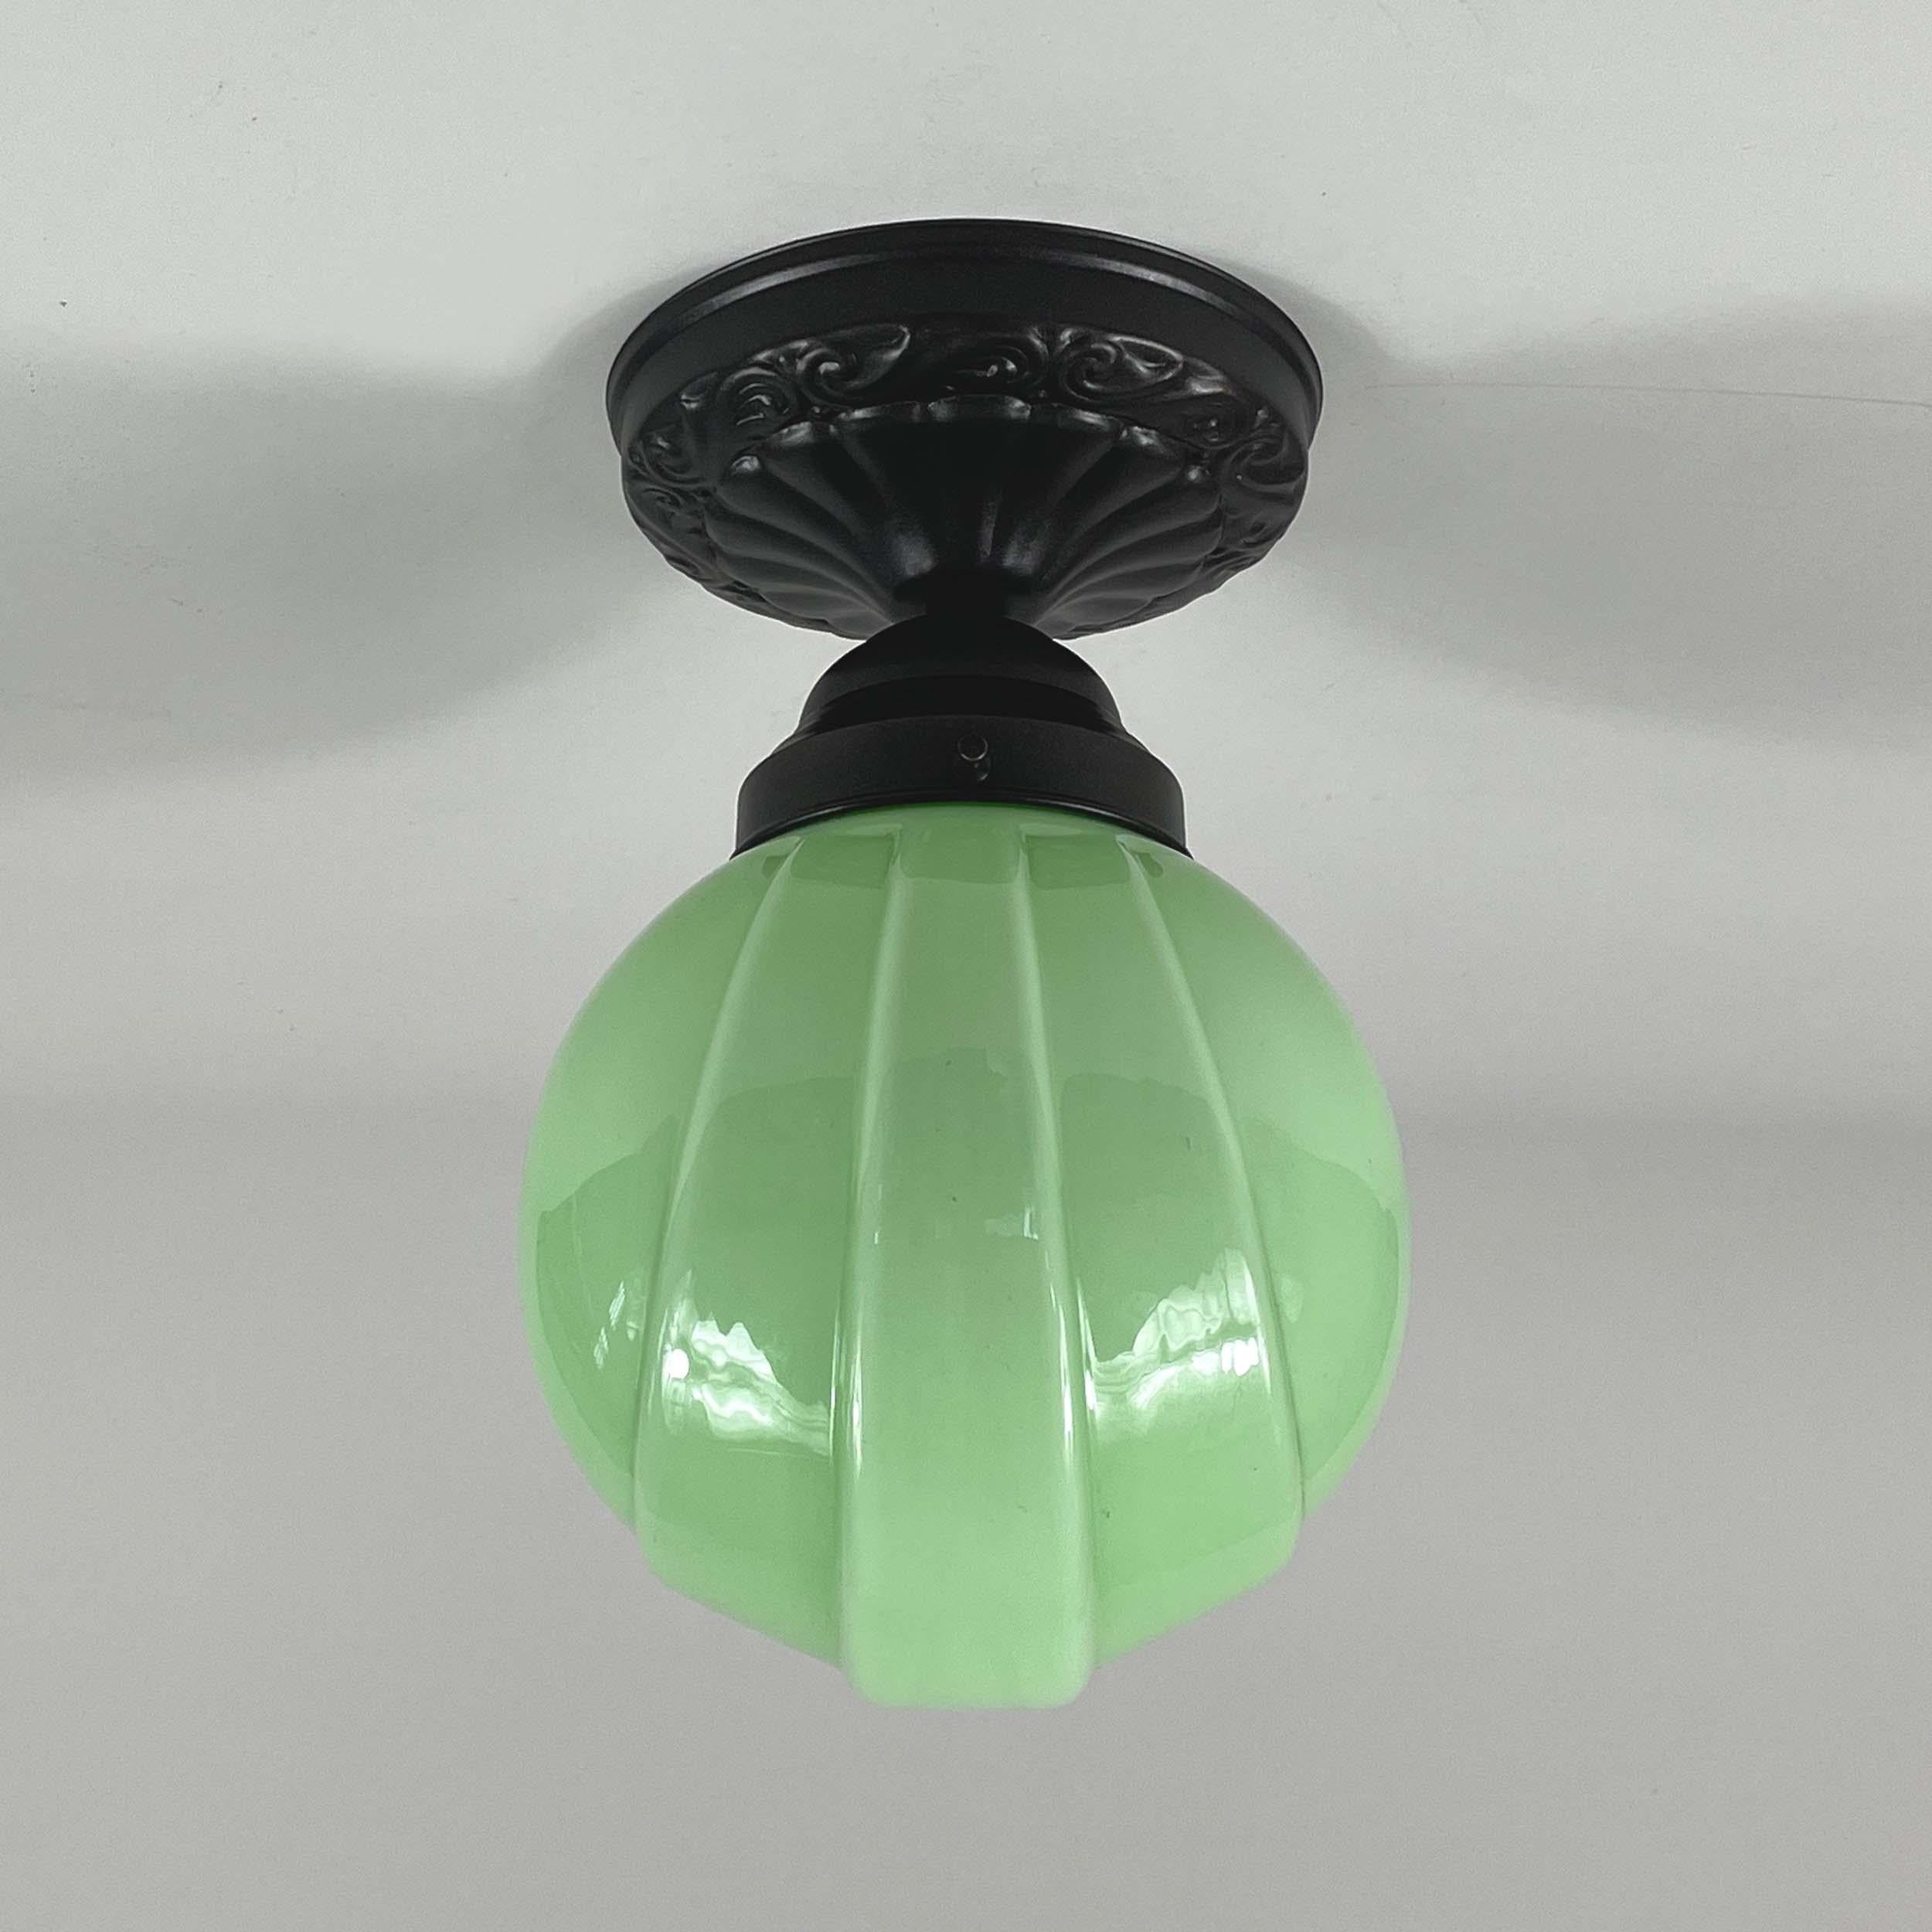 This Art Deco flush mount was designed and manufactured in Germany in the 1920s to 1930s. It features a pale green opaline lampshade and bronzed / burnished hardware.

The light requires one E26 / E27 bulb (LED recommended).

Diameter of canopy is